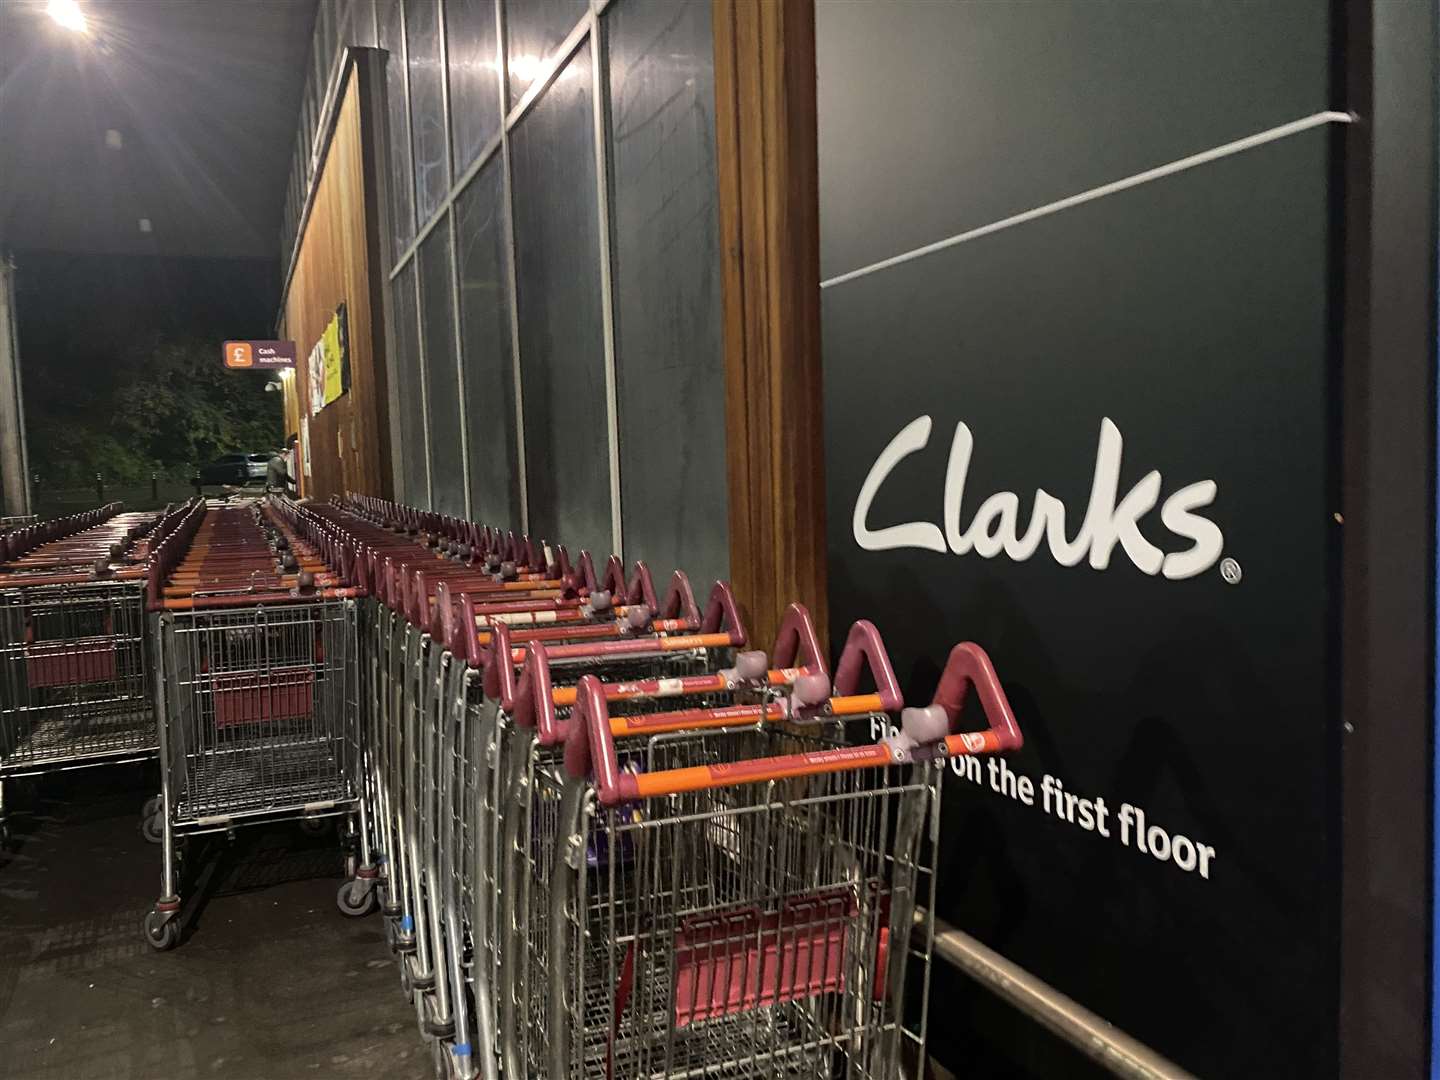 Clarks opened in the supermarket in August 2021